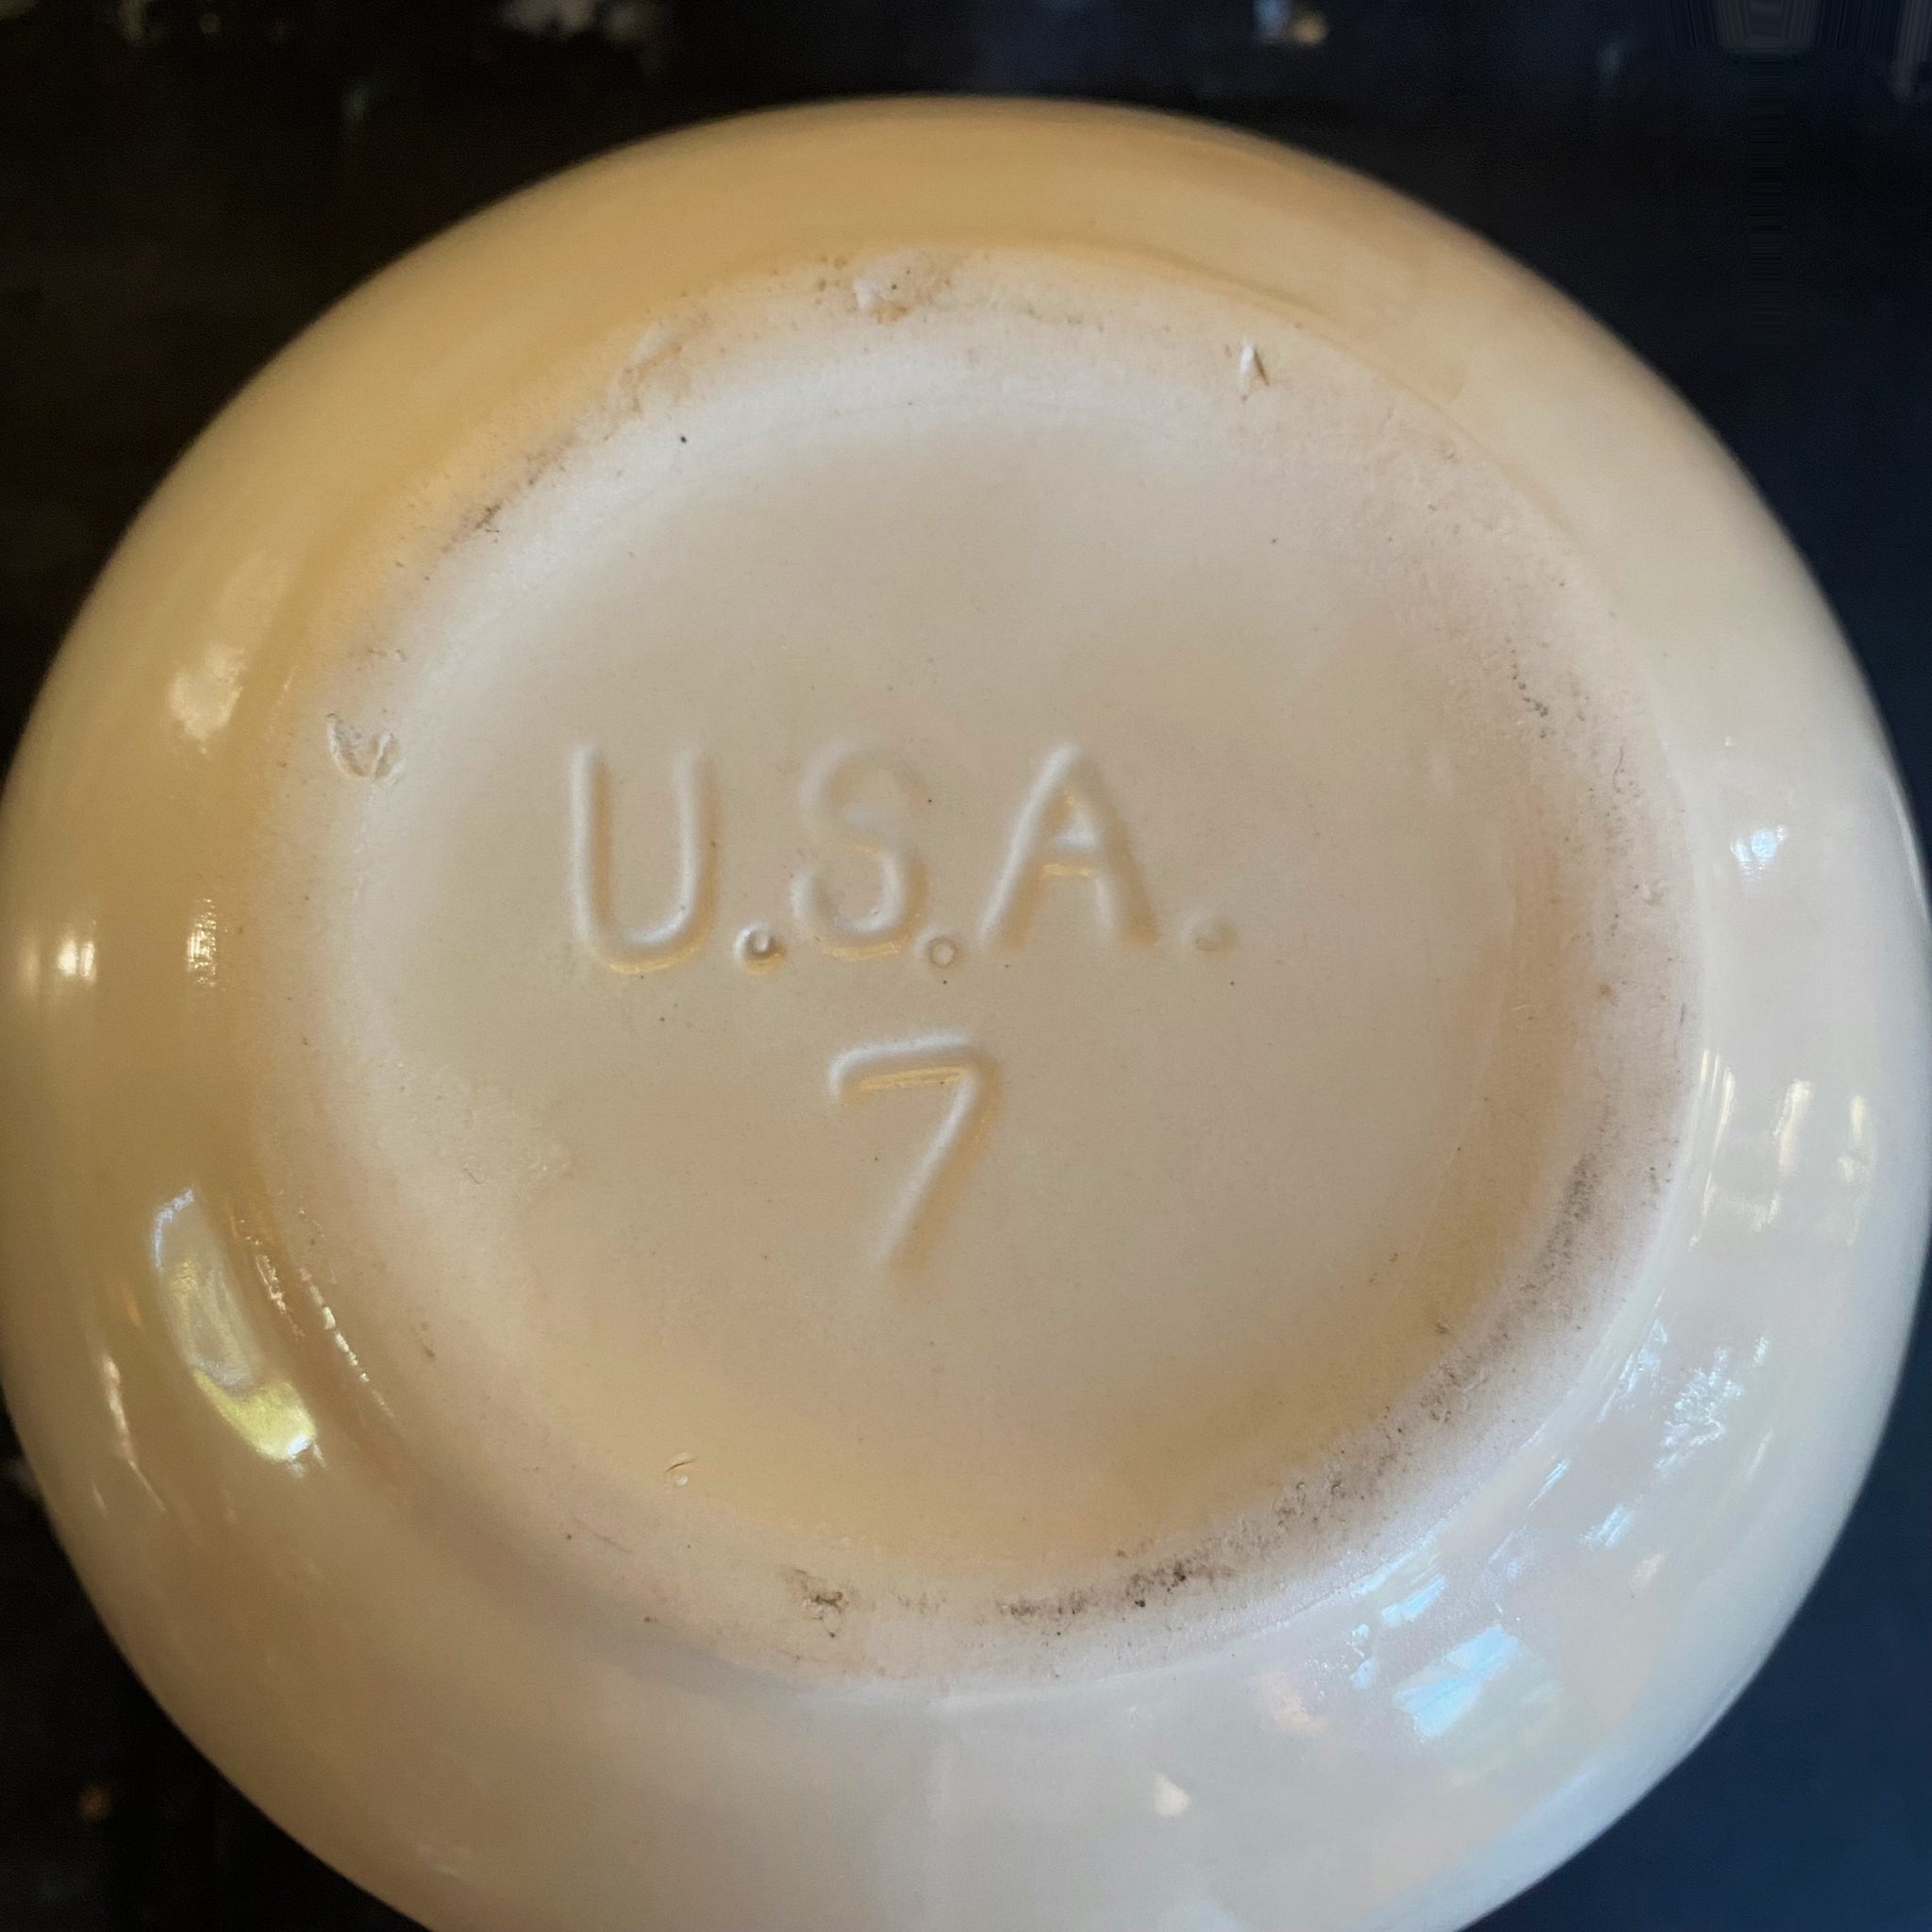 Vintage Water Jug  Marked USA 7 Possibly by Hall Pottery circa Early-Mid 20th Century